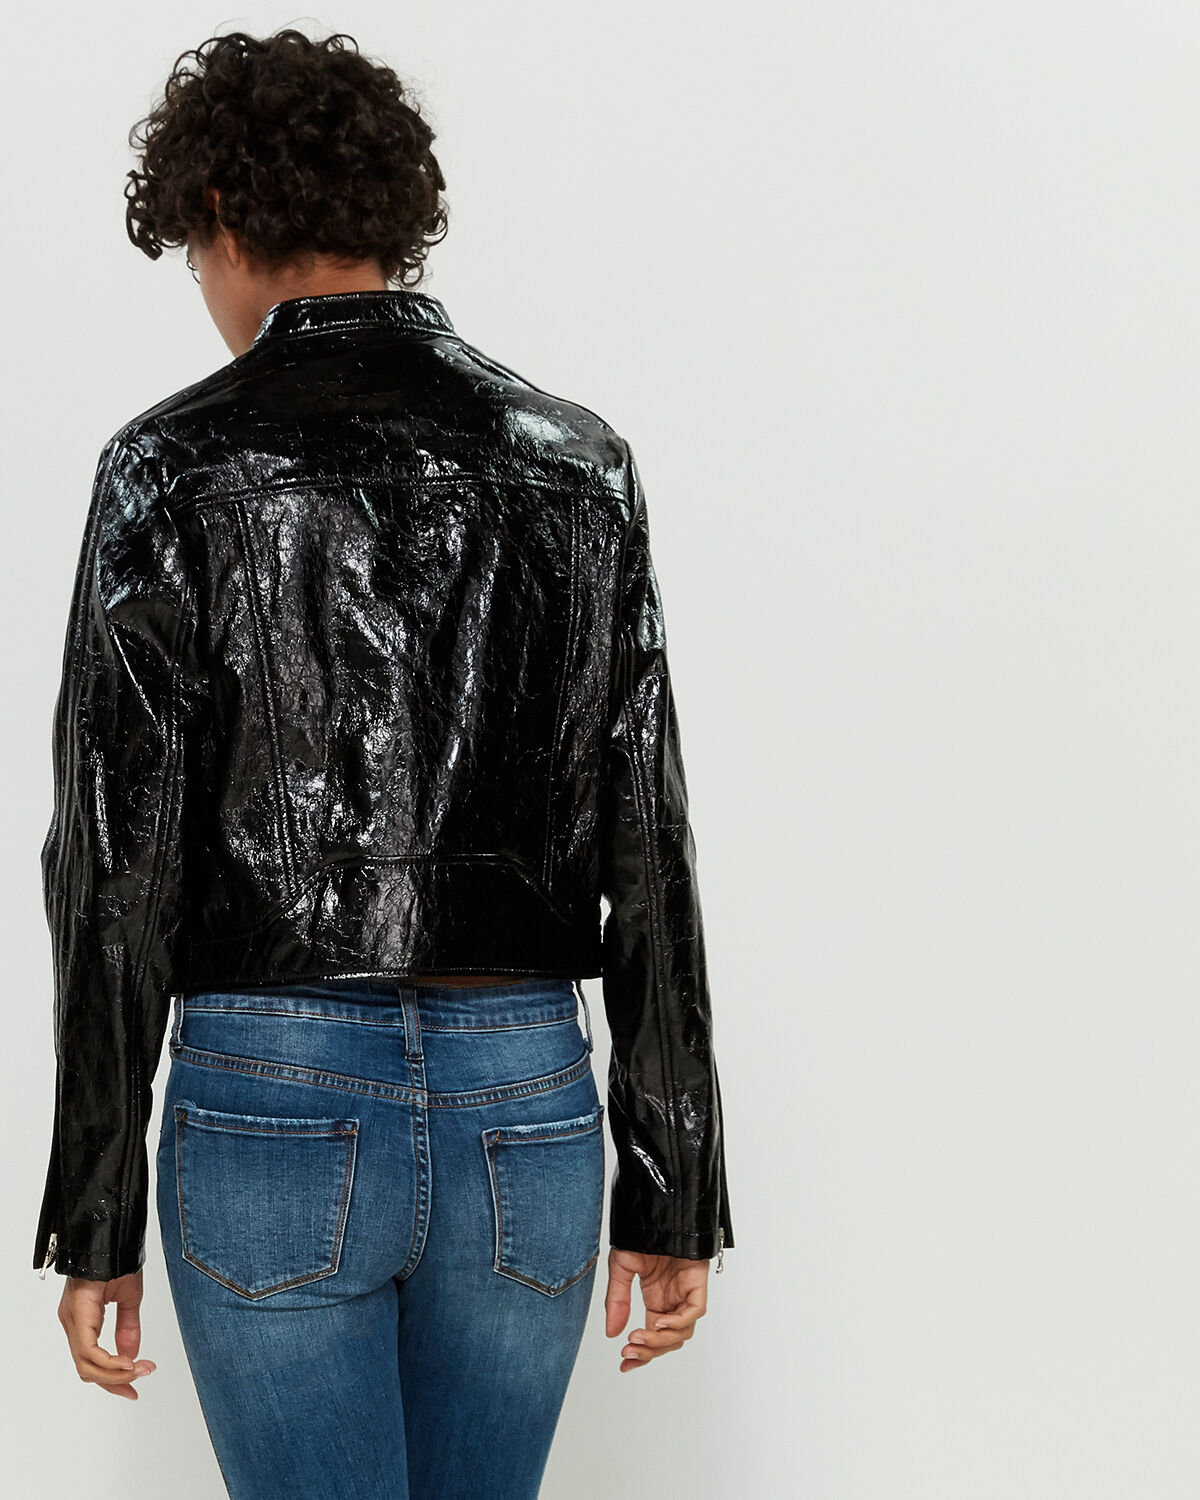 This Rag & Bone Leather Jacket Is Under $200 For One Day Only!